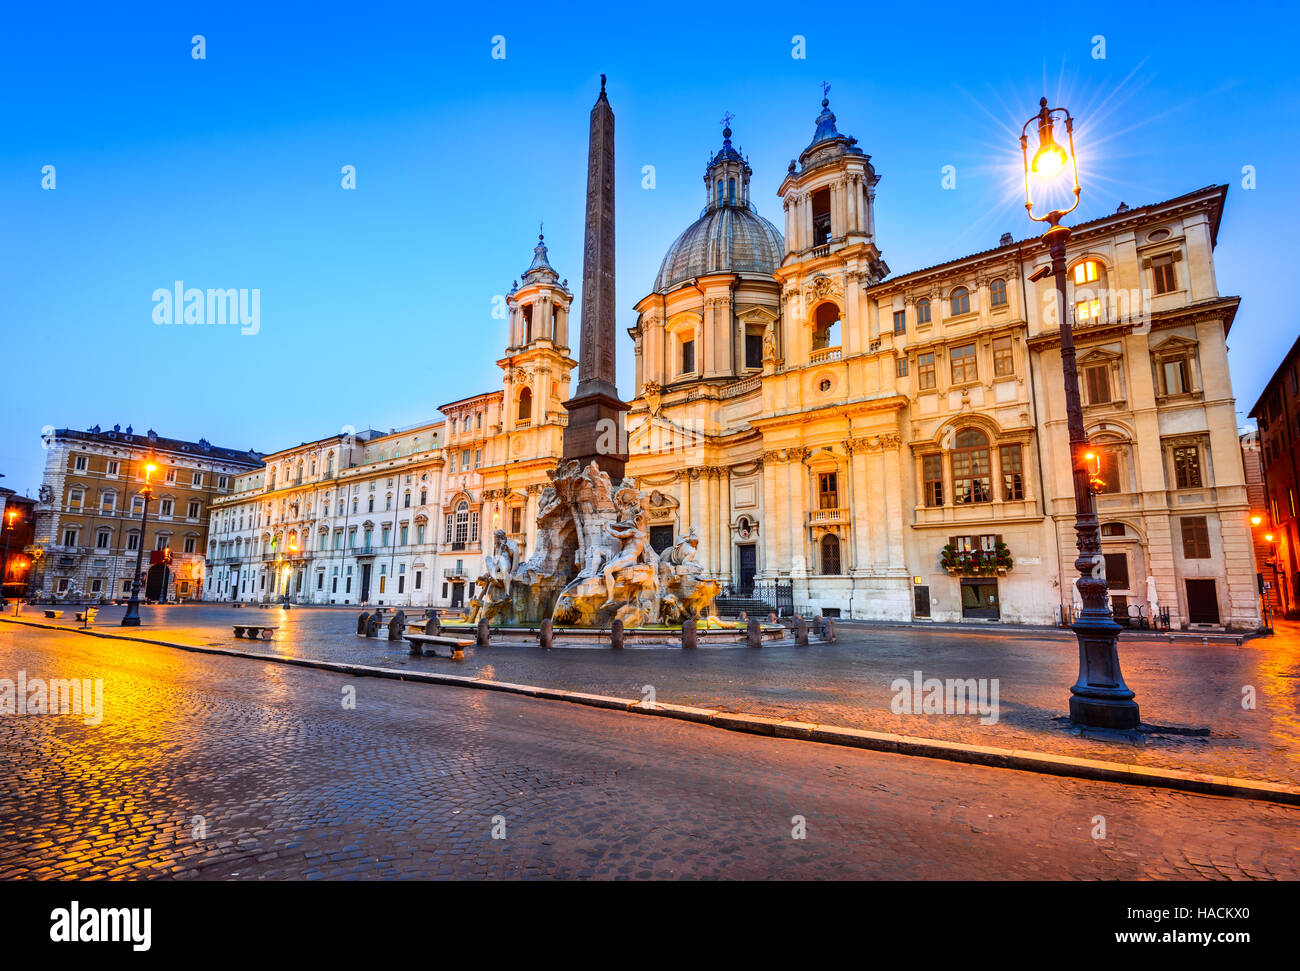 Rome, Italy. Famous Piazza Navona Square Fountain of the Four Rivers with an Egyptian obelisk in Piazza Navona. Stock Photo